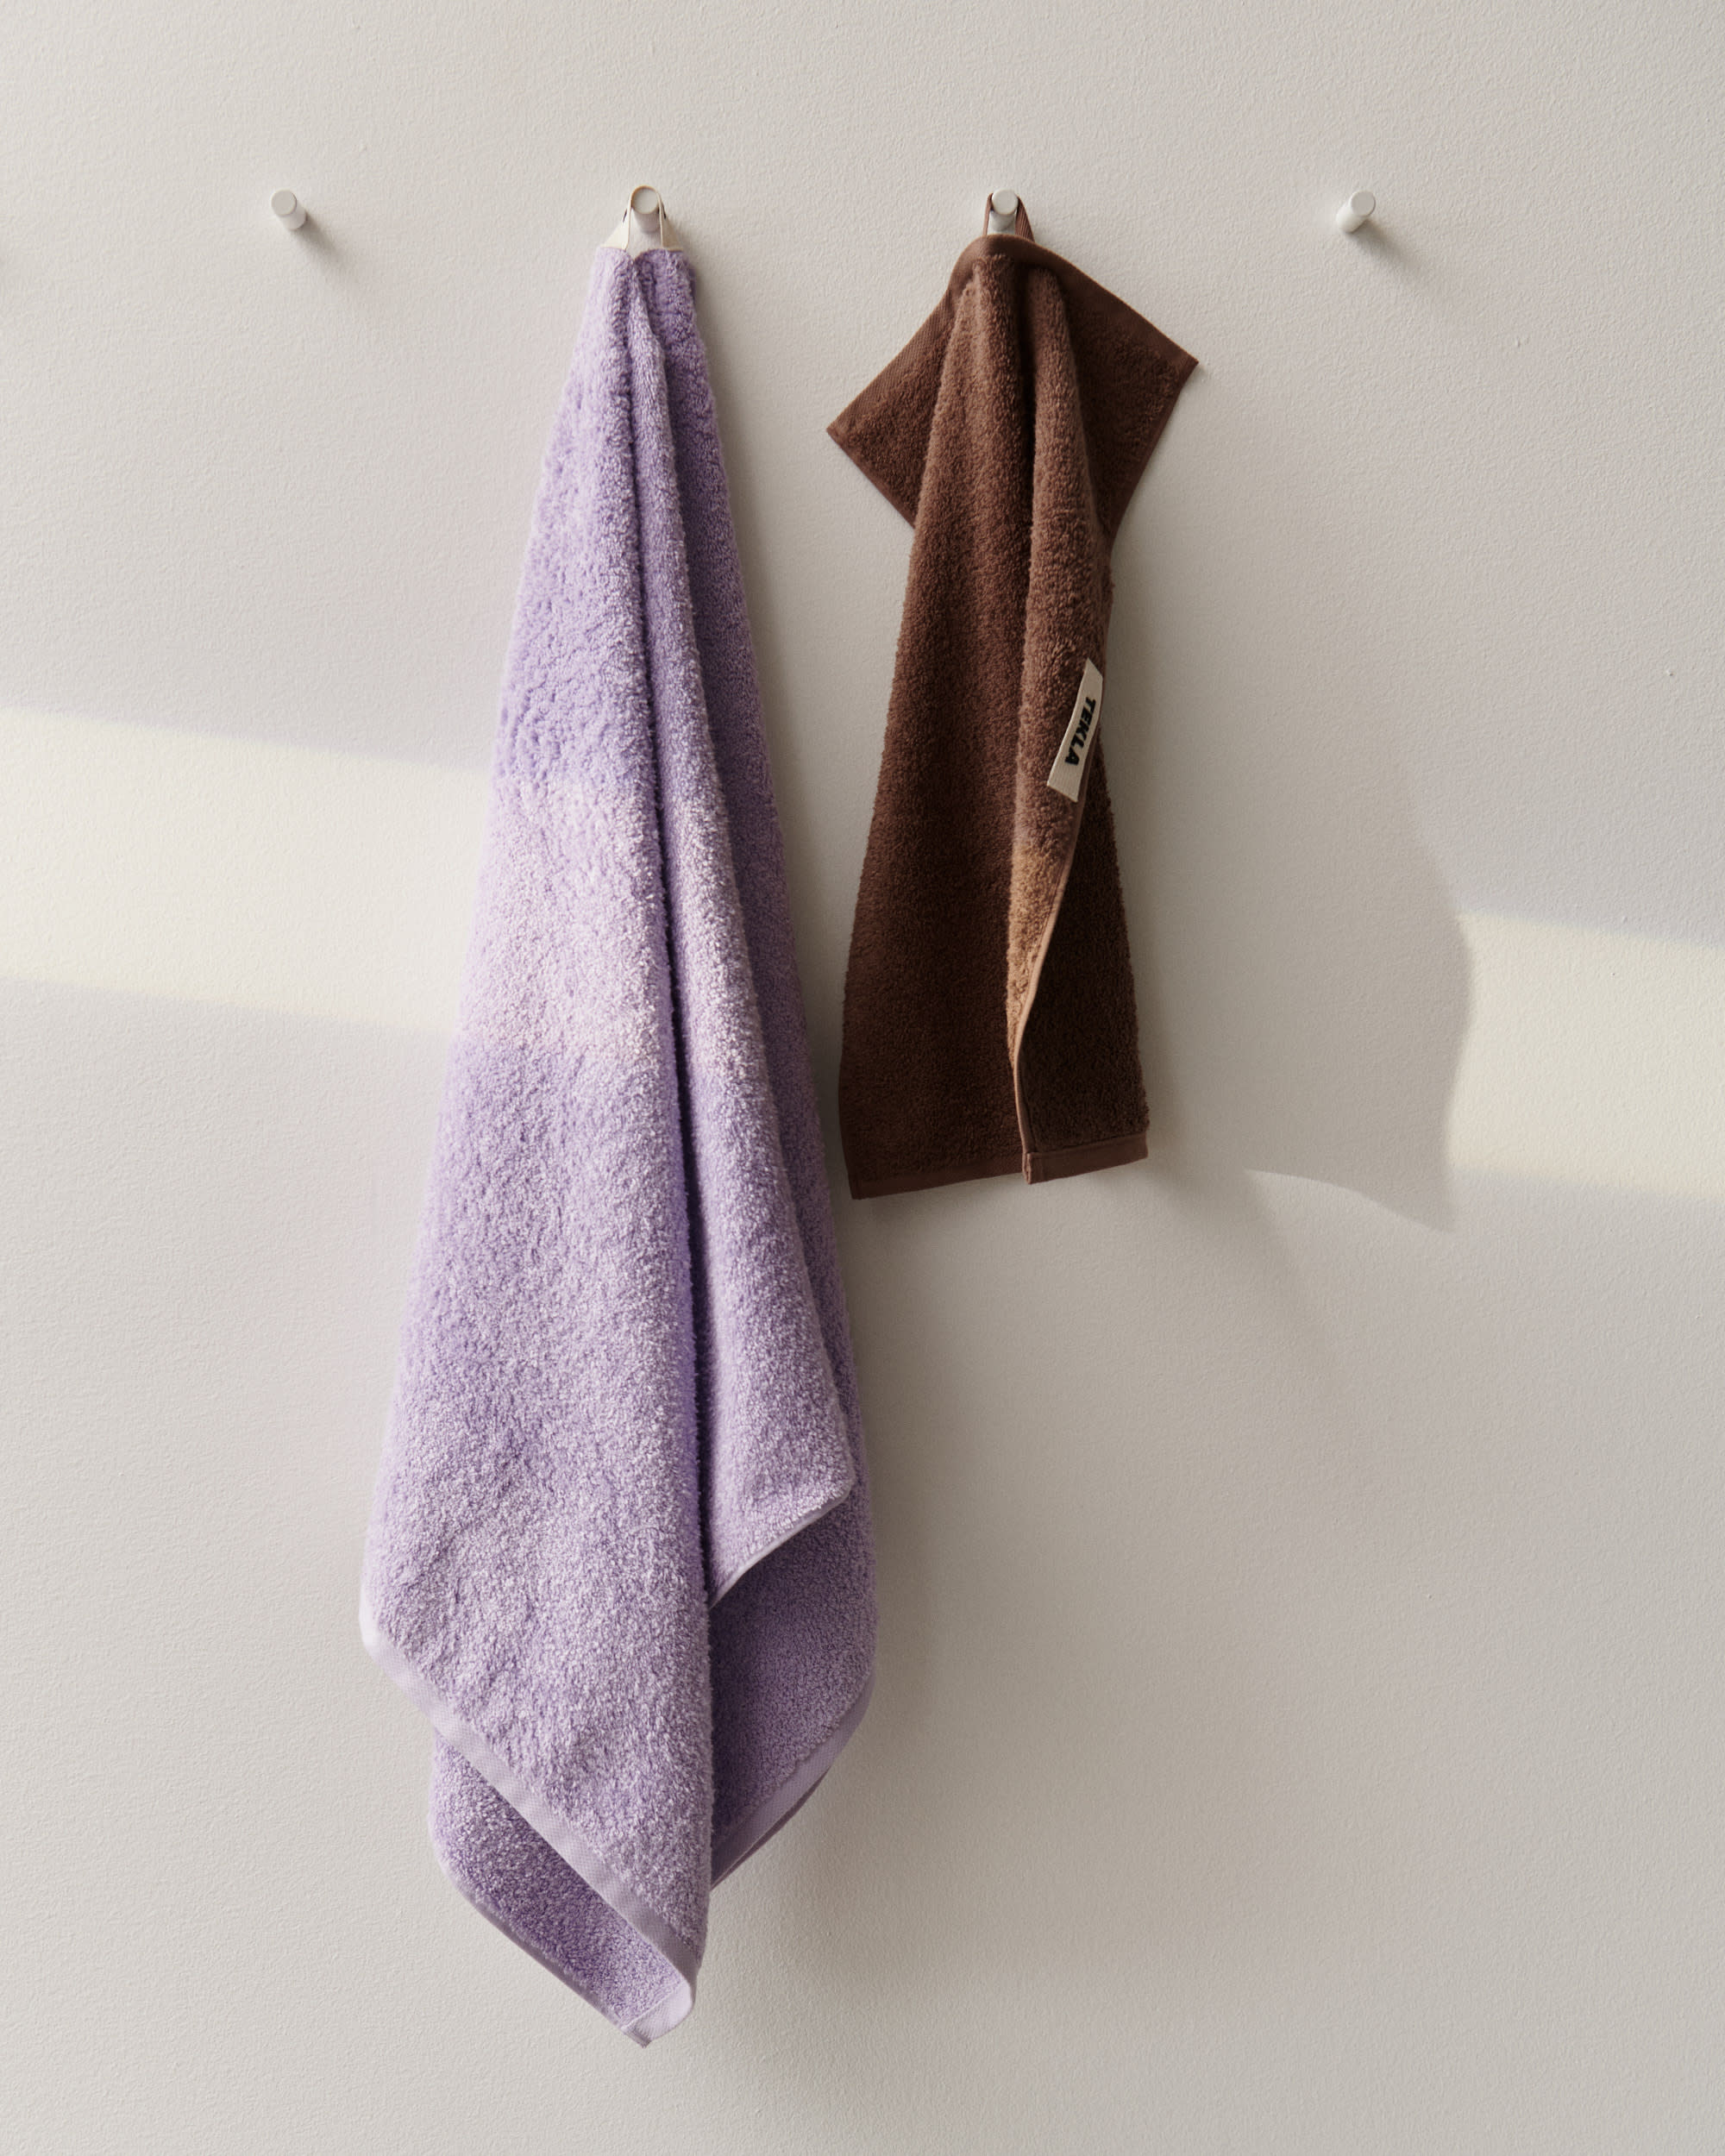 Lavender paired with Kodiak Brown towels